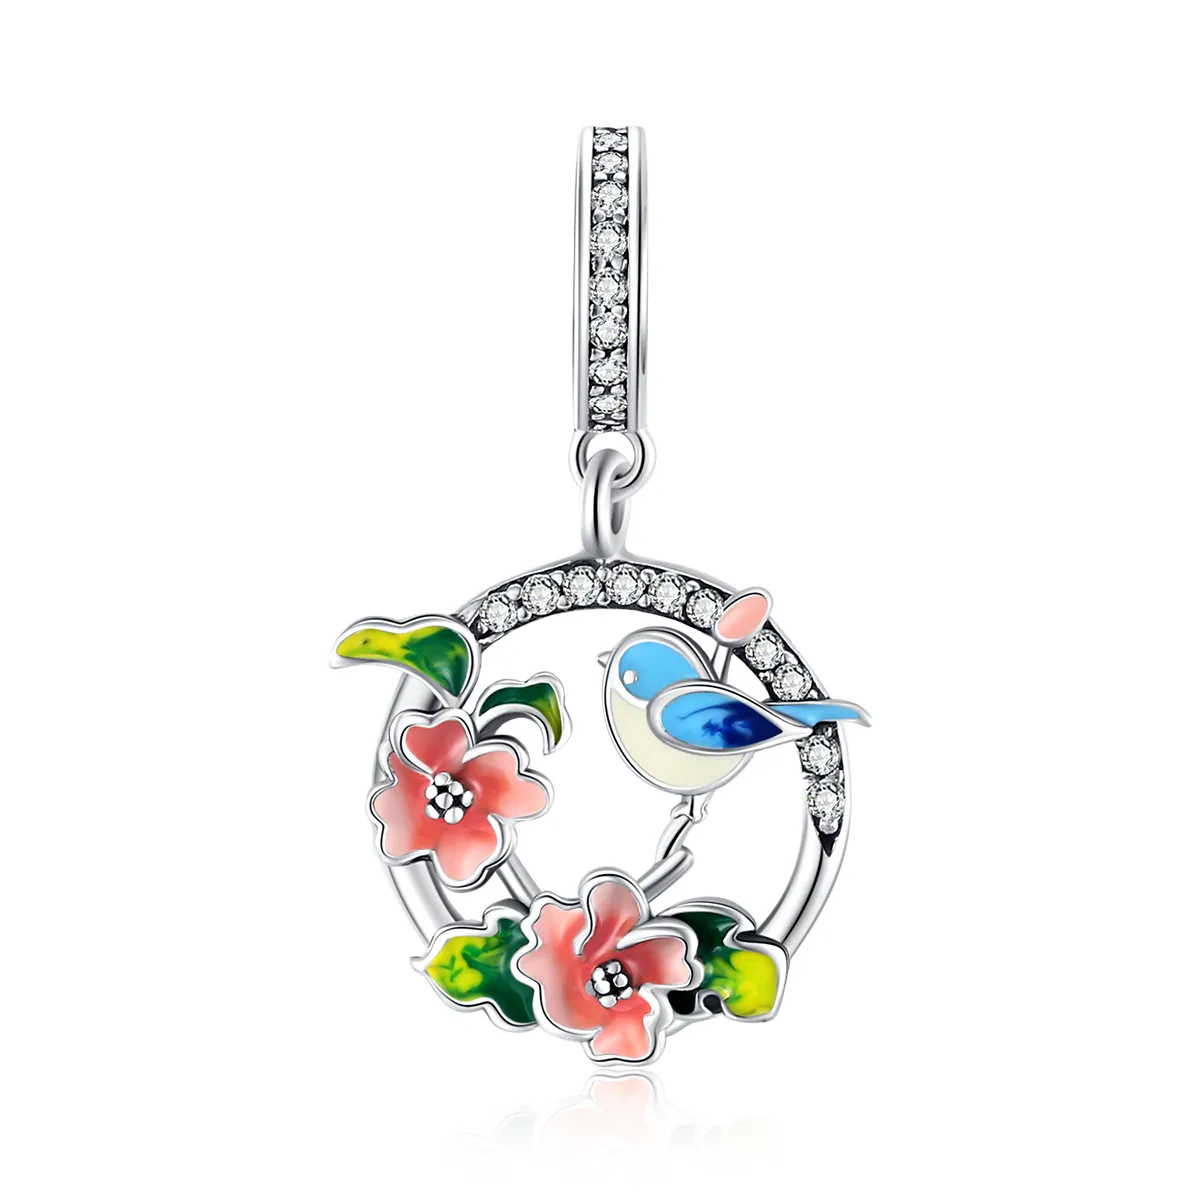 Pandora Style Silver Lucky Letter K Necklace - SCN403